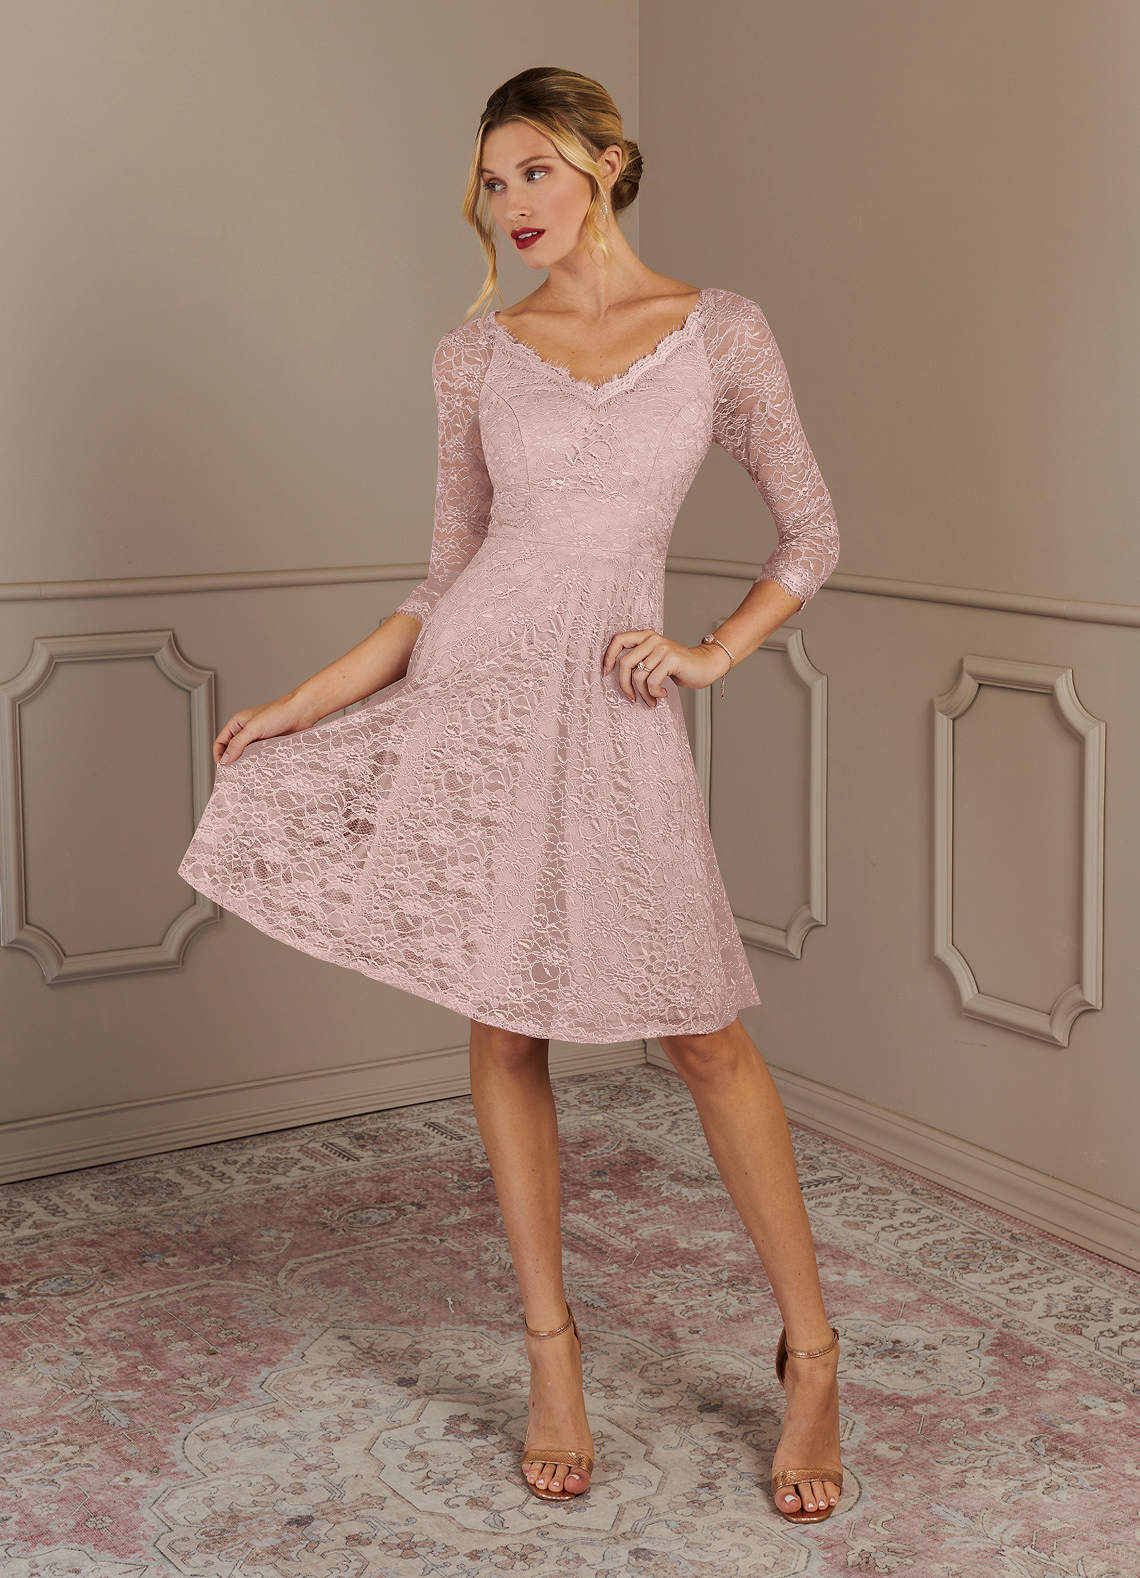 dusty rose mother of the bride dress